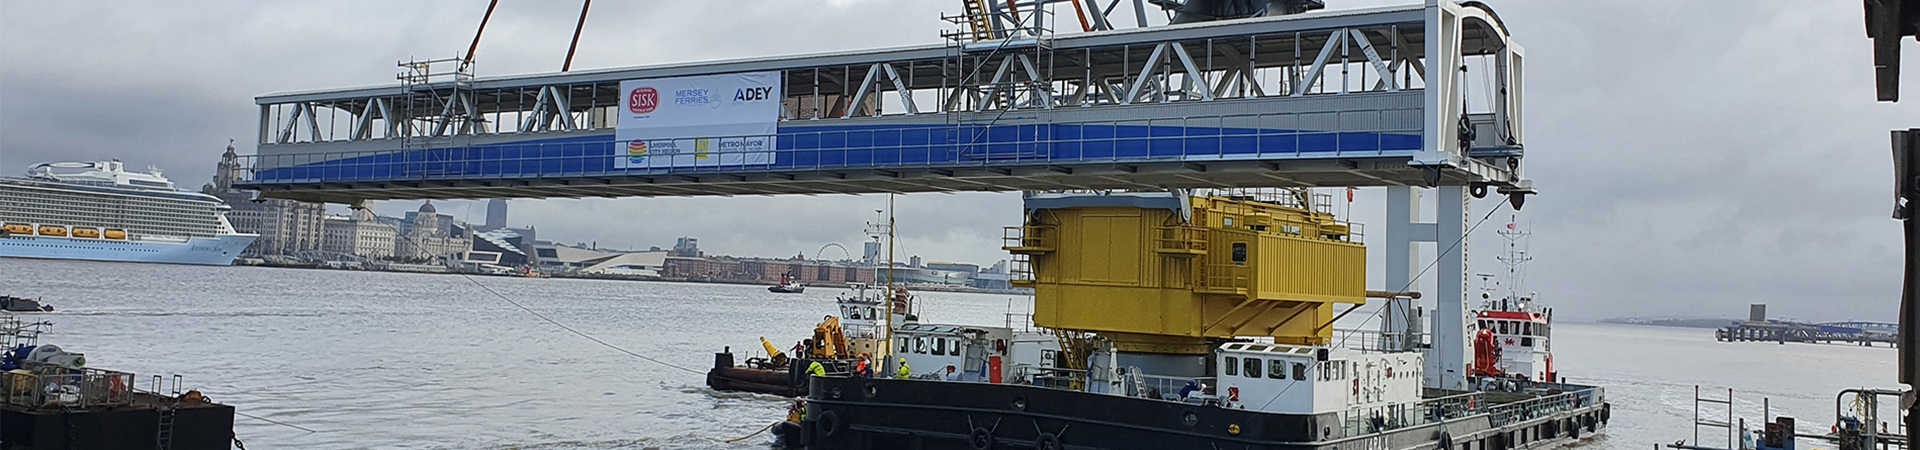 Bridge being moved on a tug boat